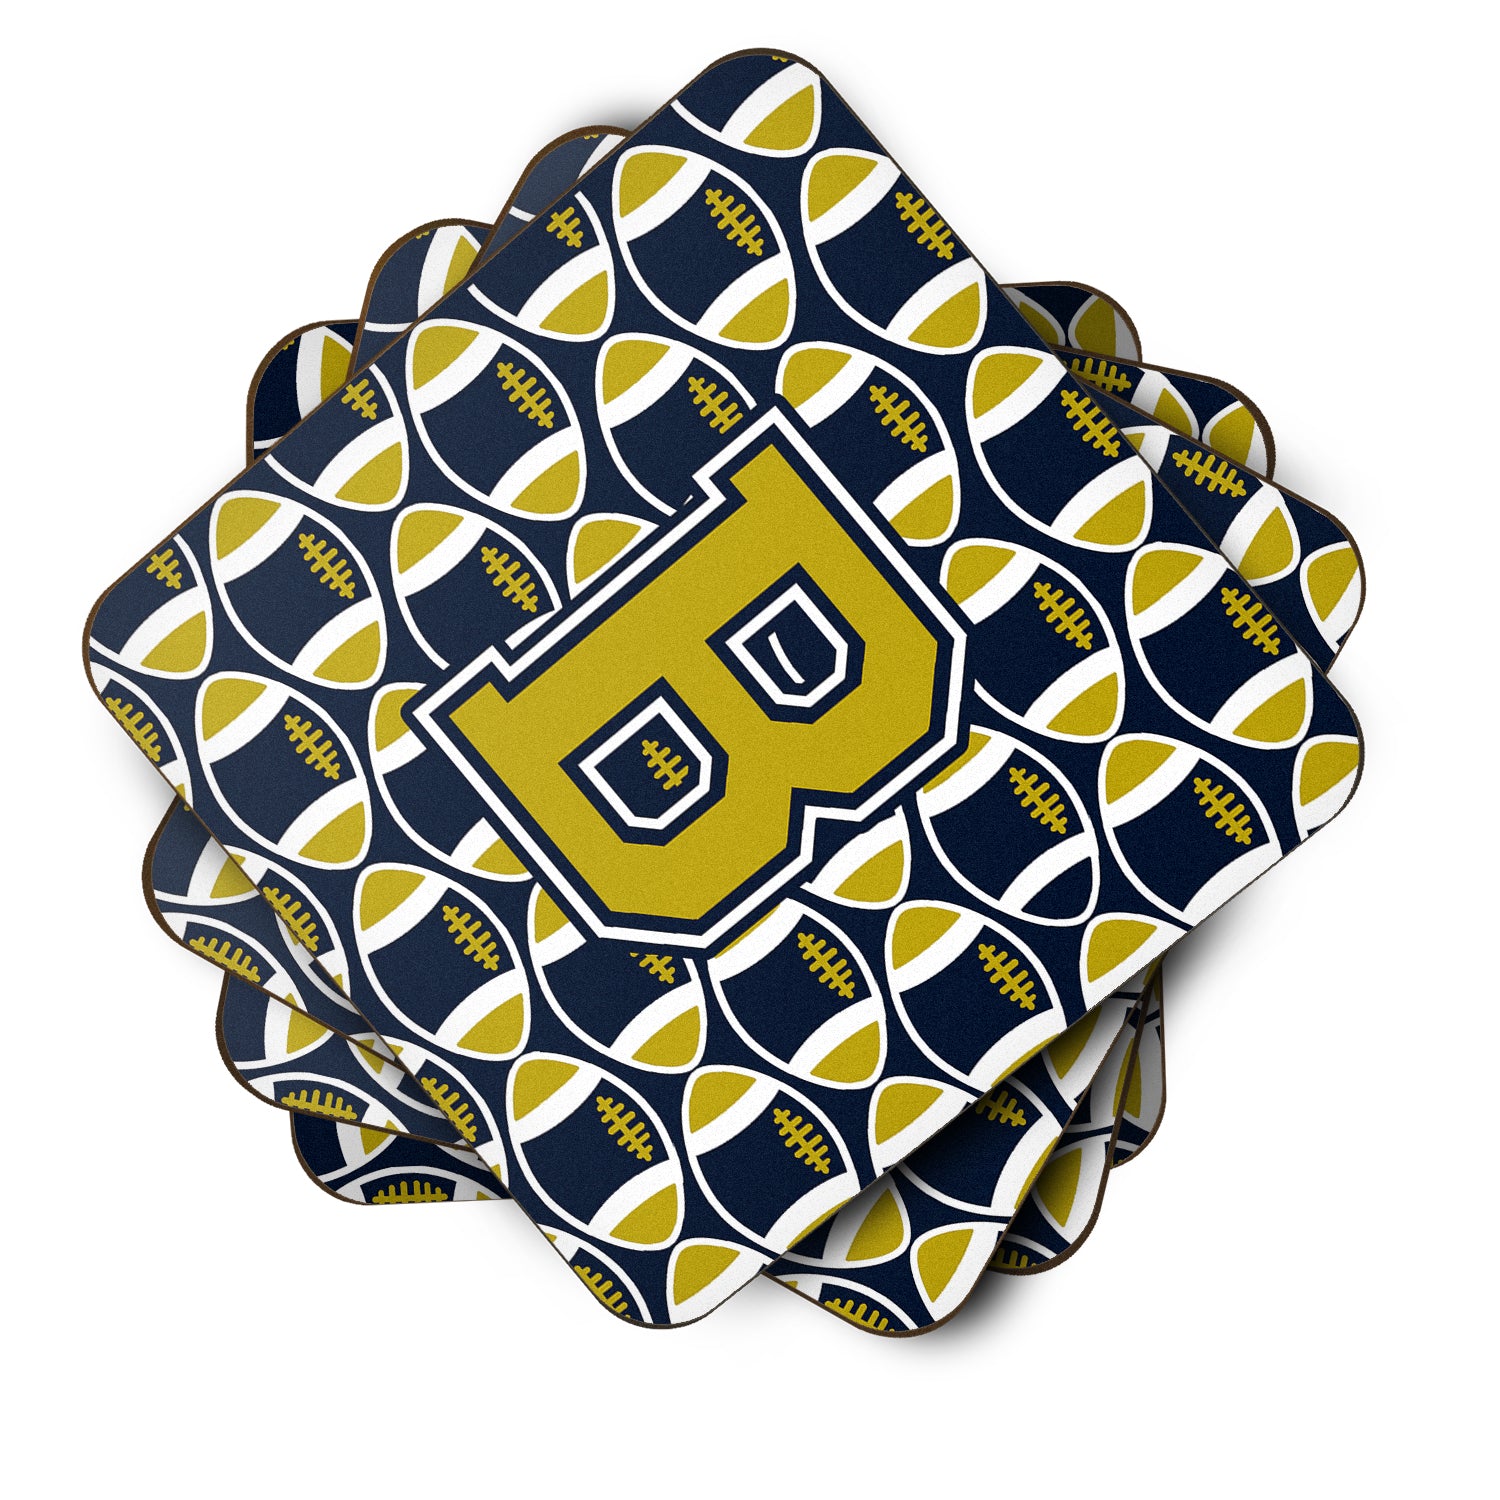 Letter B Football Blue and Gold Foam Coaster Set of 4 CJ1074-BFC - the-store.com